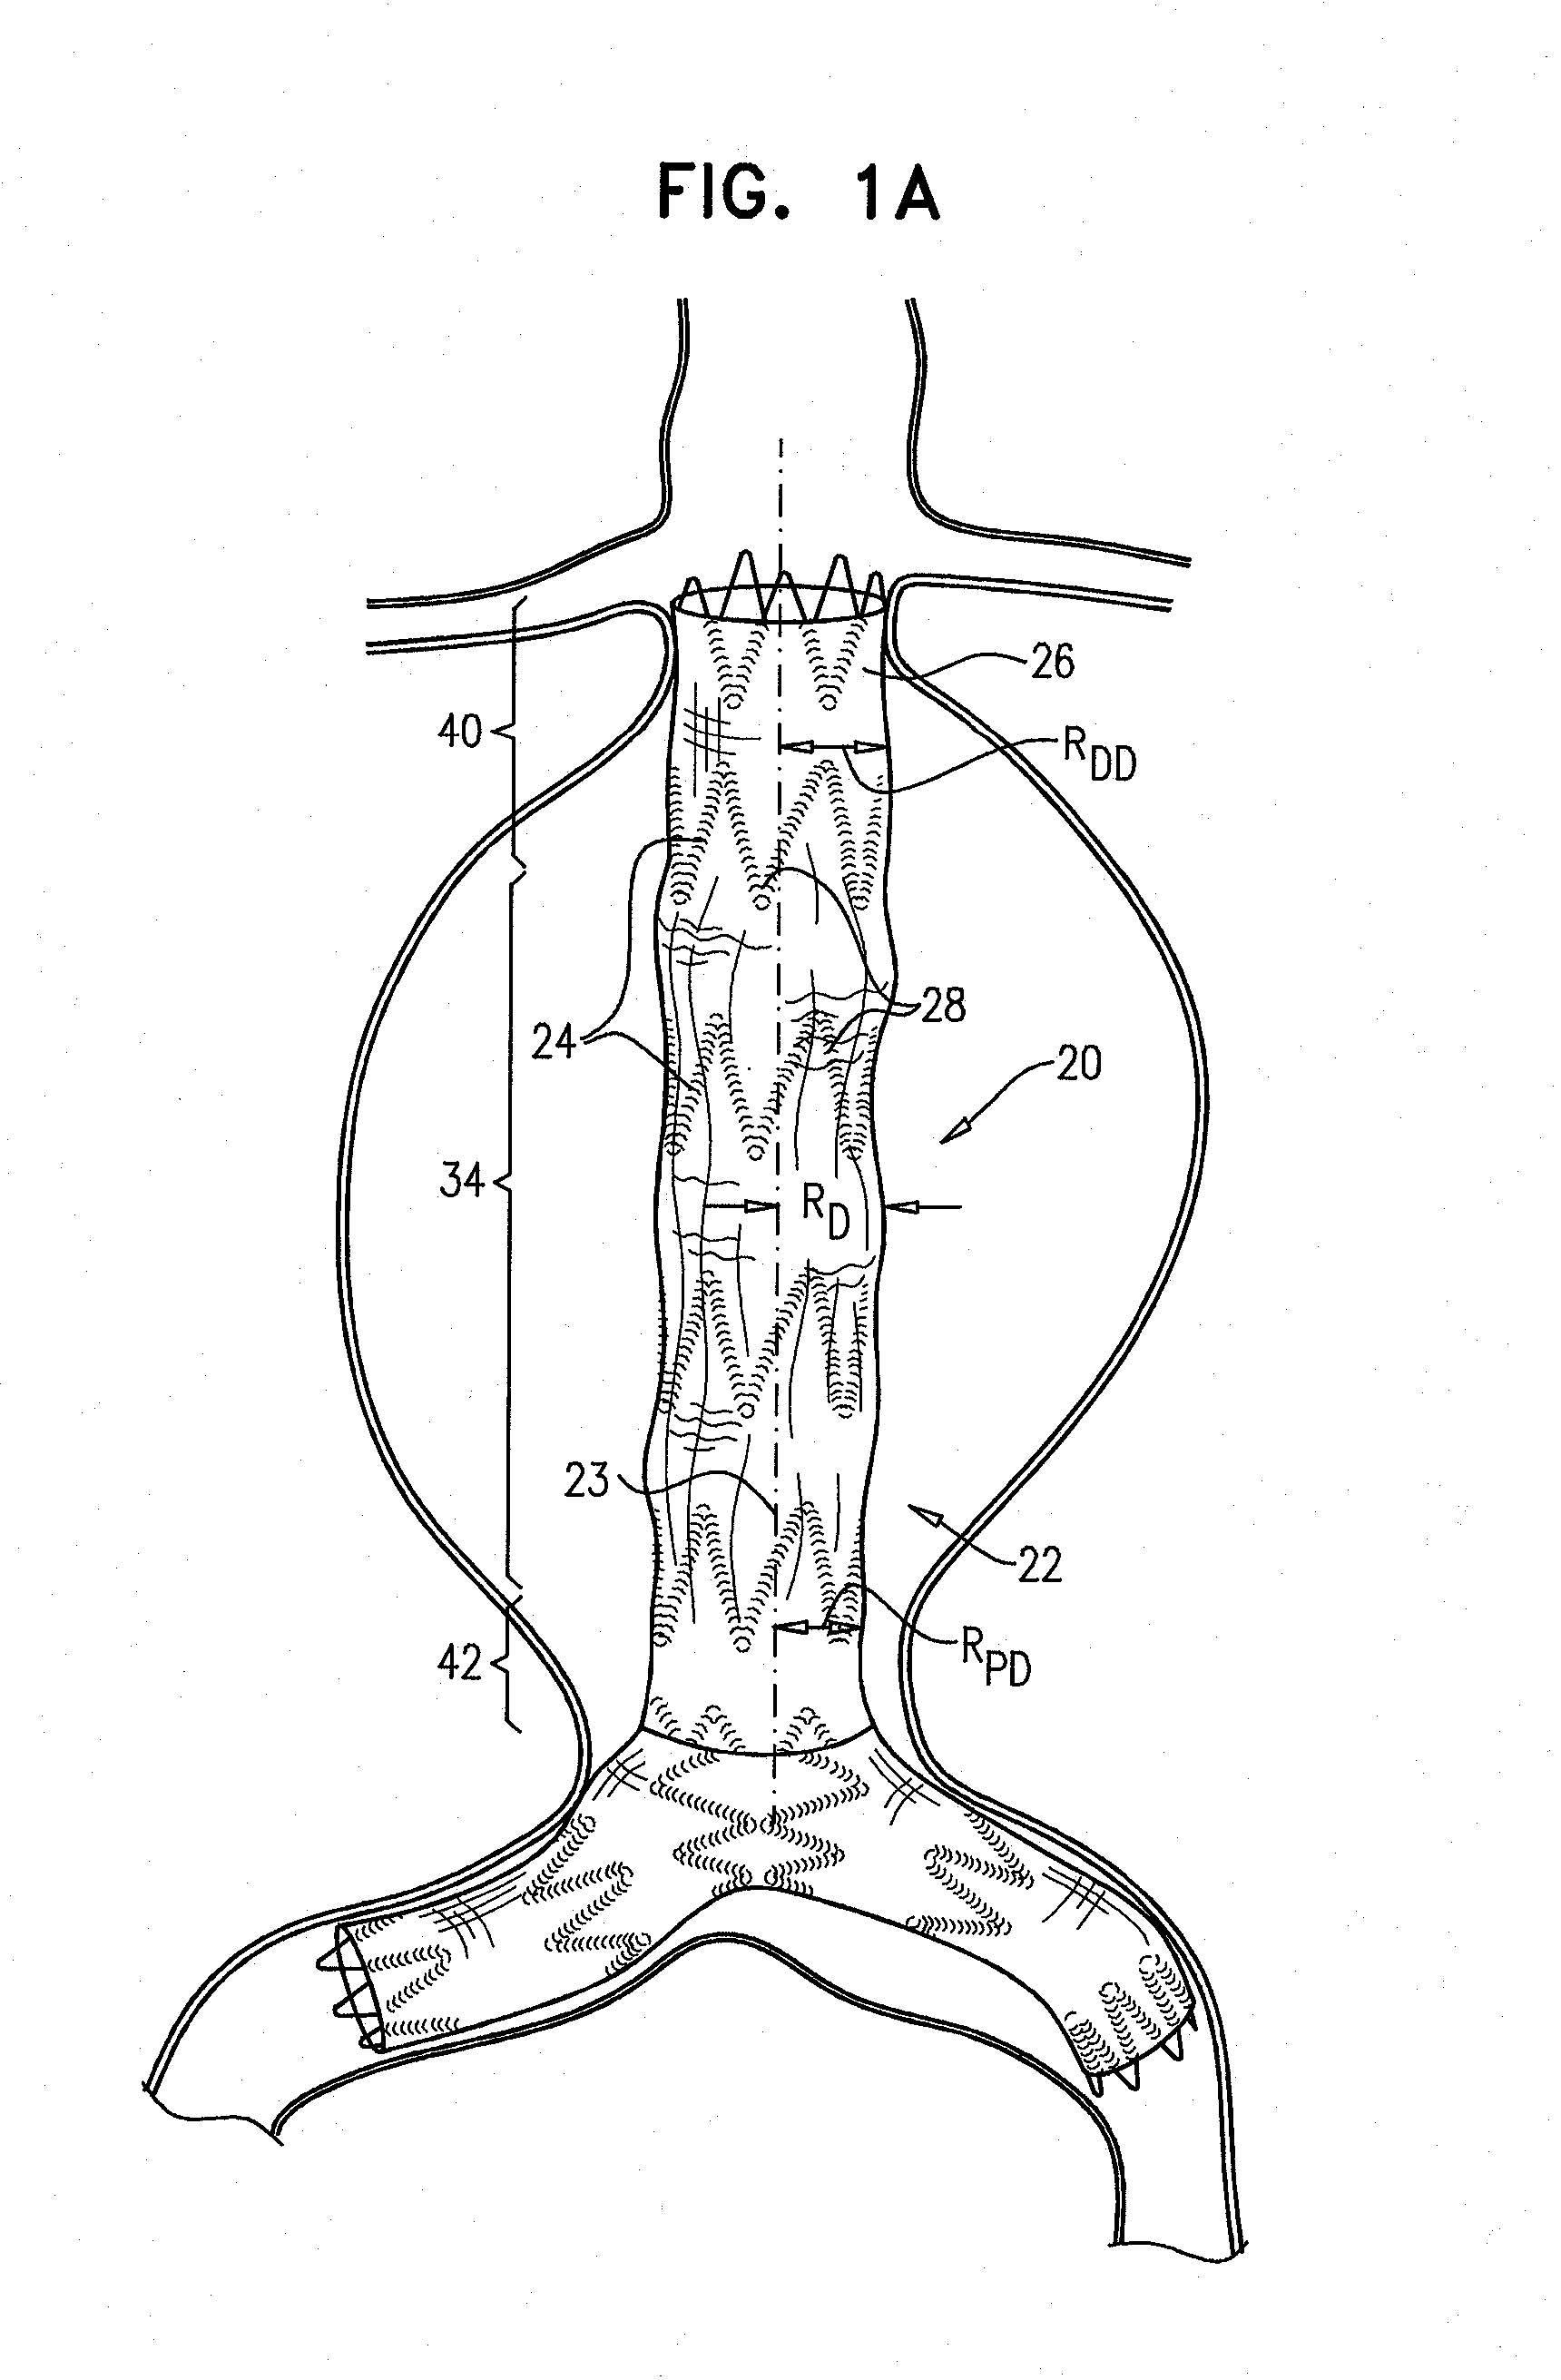 Stent-grafts with post-deployment variable radial displacement